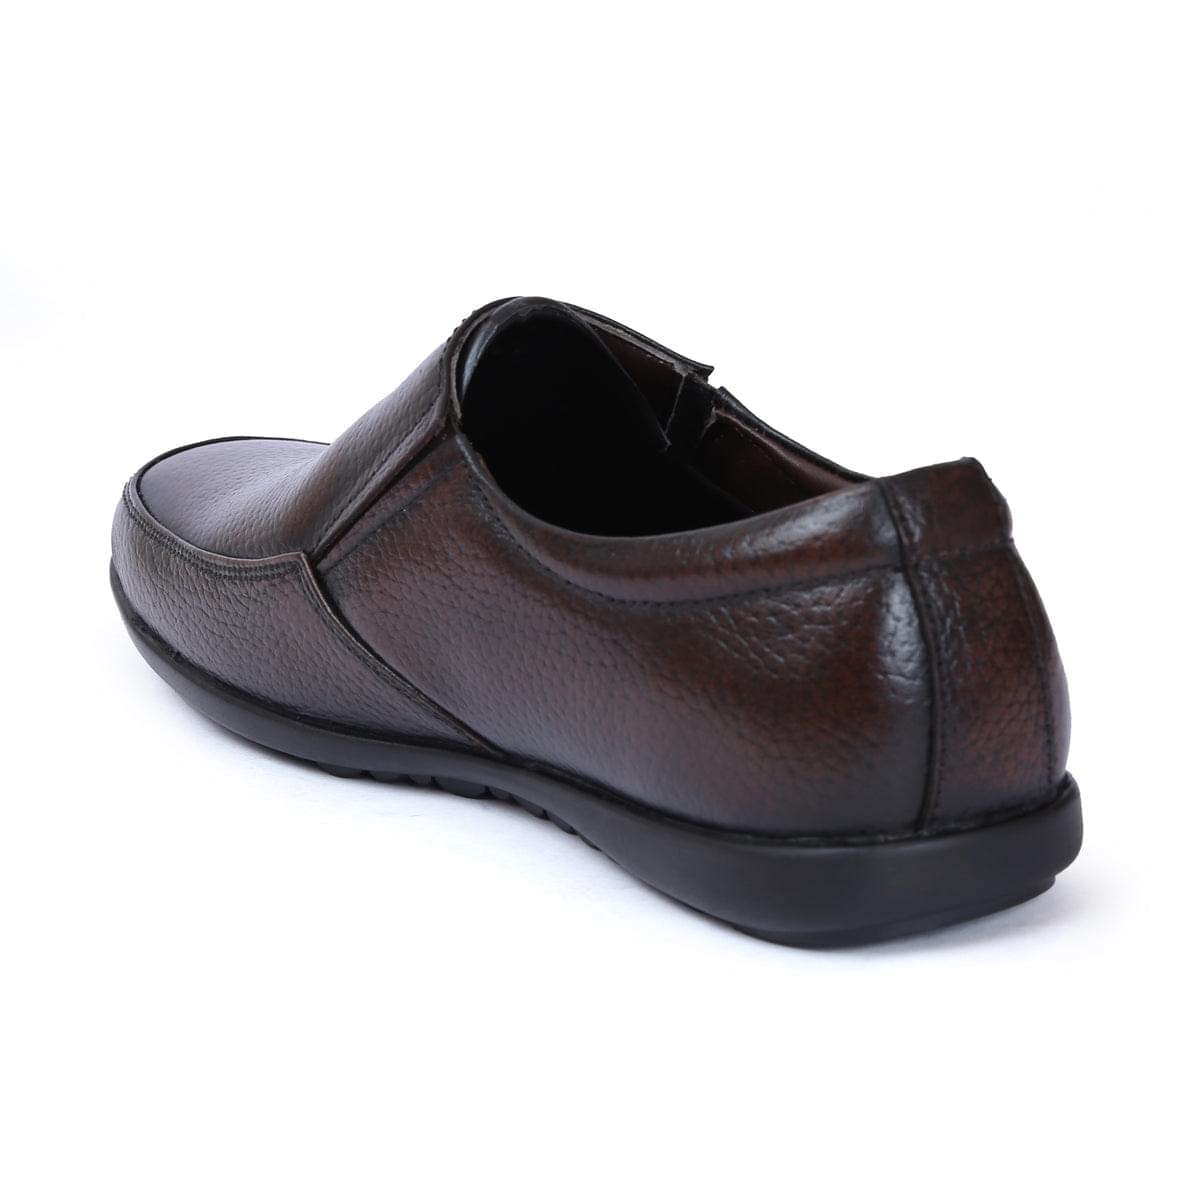 Men’s Leather Slip On Loafers 